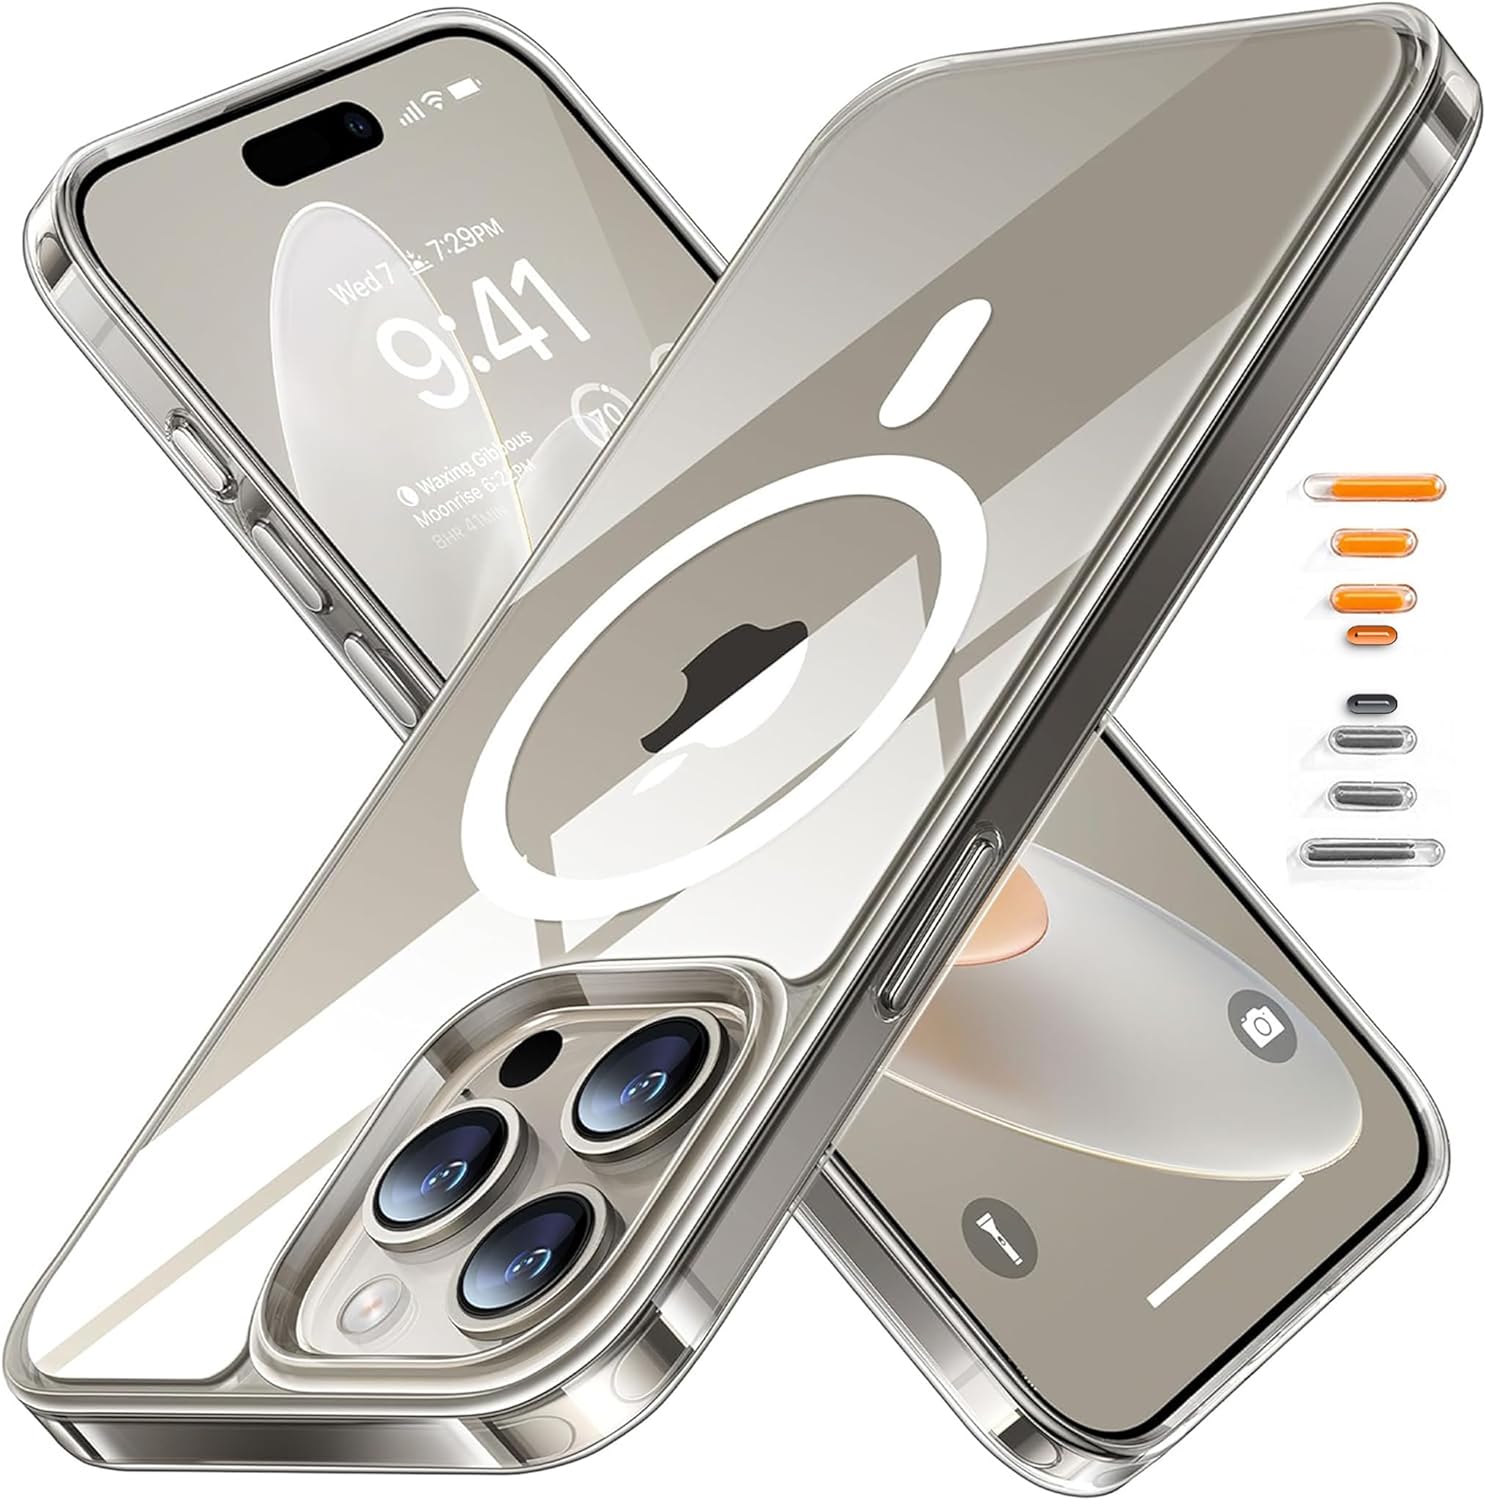 TORRAS-Magnetic-Clear-for-iPhone-15-Pro-Max-Case-Military-Grade-Drop-Tested-Anti-Yellowing-Compatible-with-MagSafe-Slim-yet-Protective-Non-Slip-Phone-Cover-for-iPhone-15-ProMax-Case-Crystal-Clear